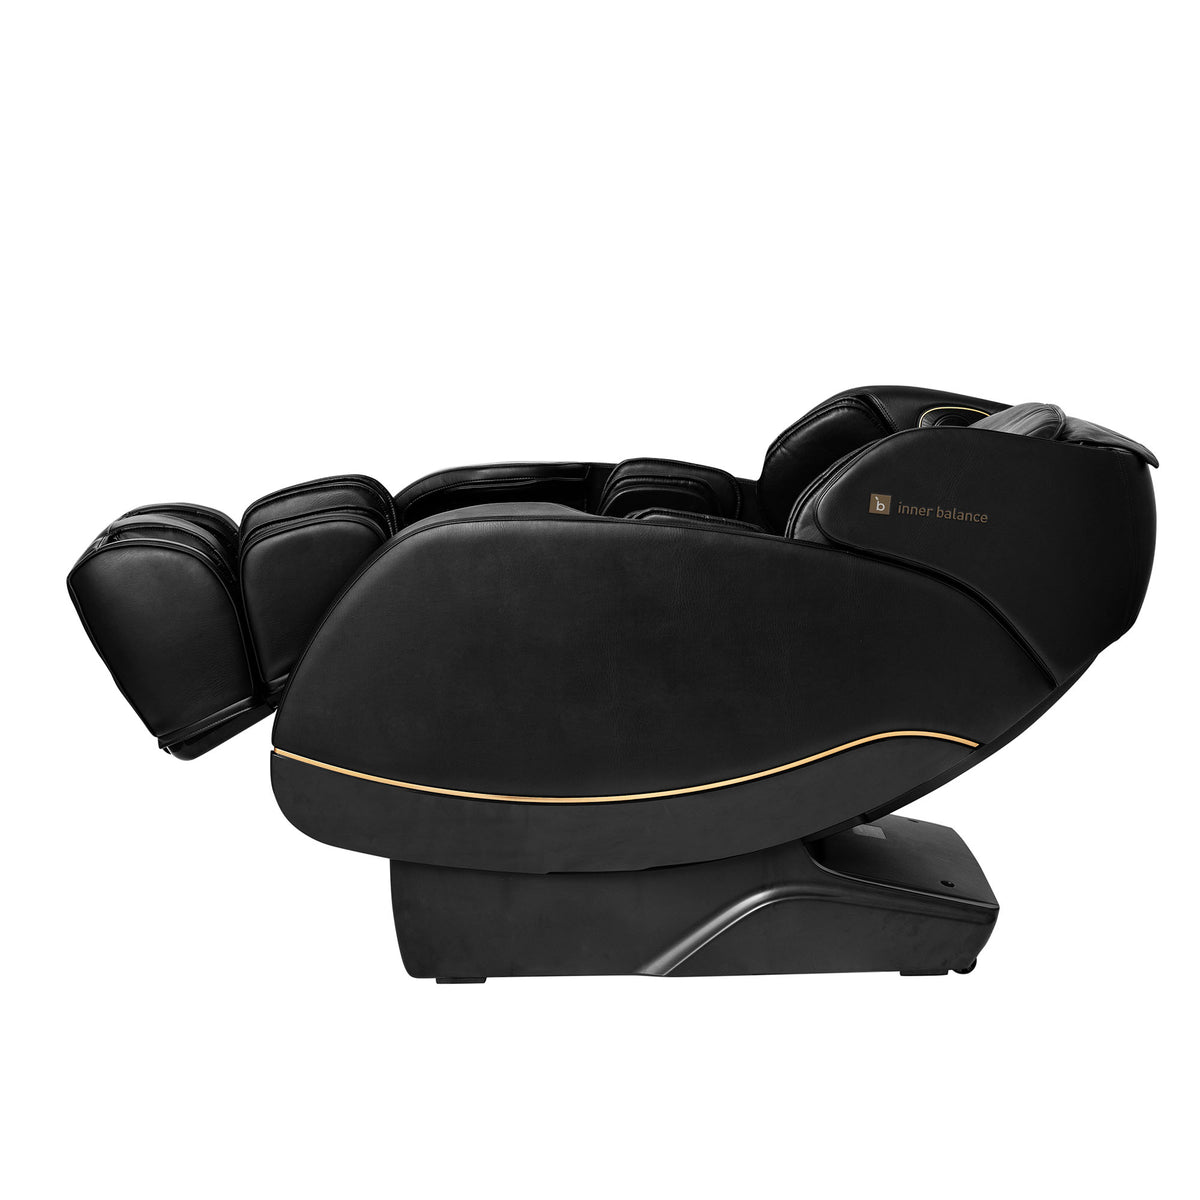 Fully reclining Gold-trimmed Inner Balance Wellness Jin 2.0 Massage Chair in black leather with gold trimming